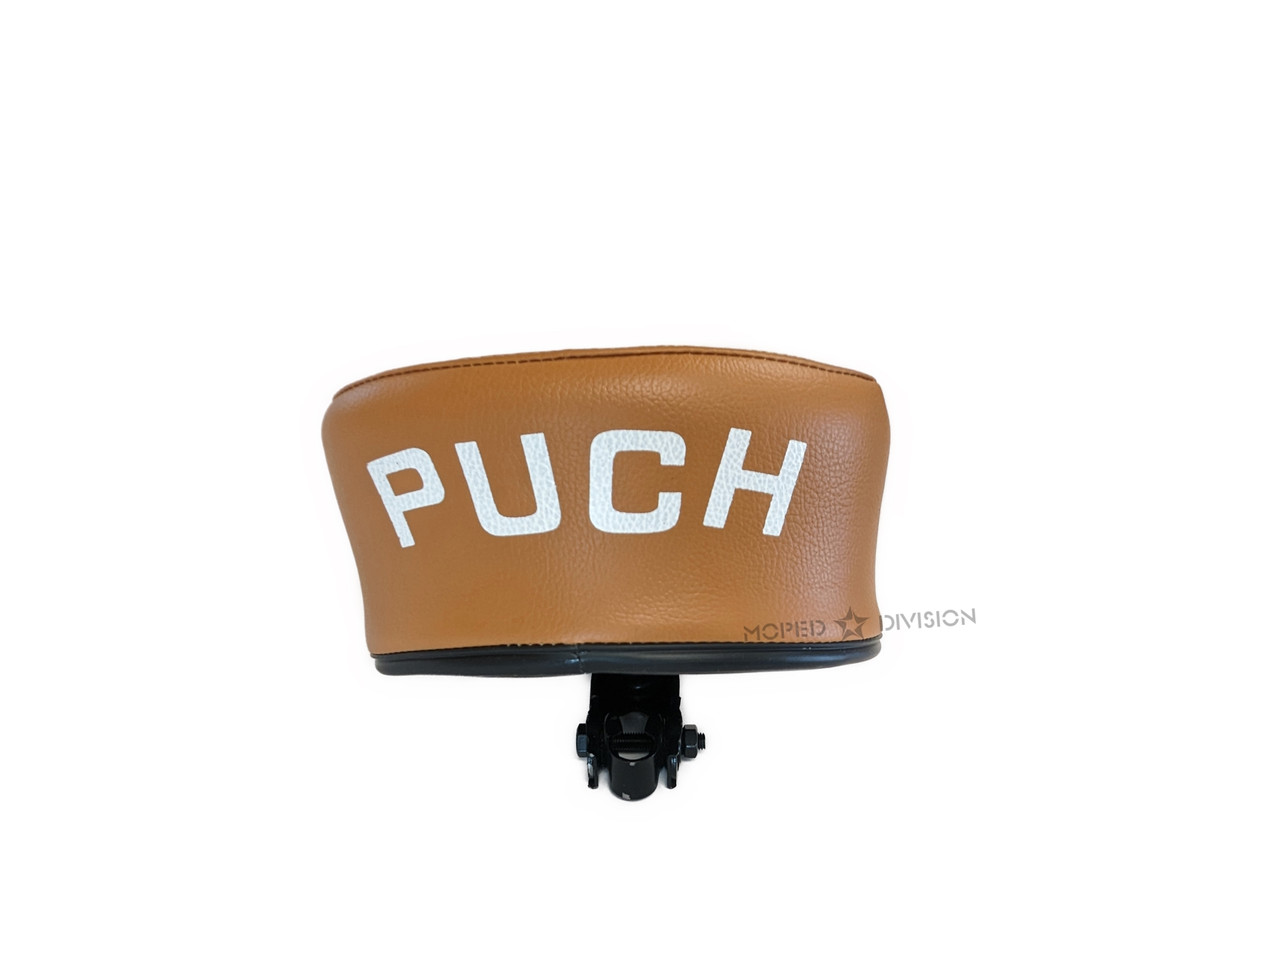 Puch Moped Single Seat * Camel Brown*